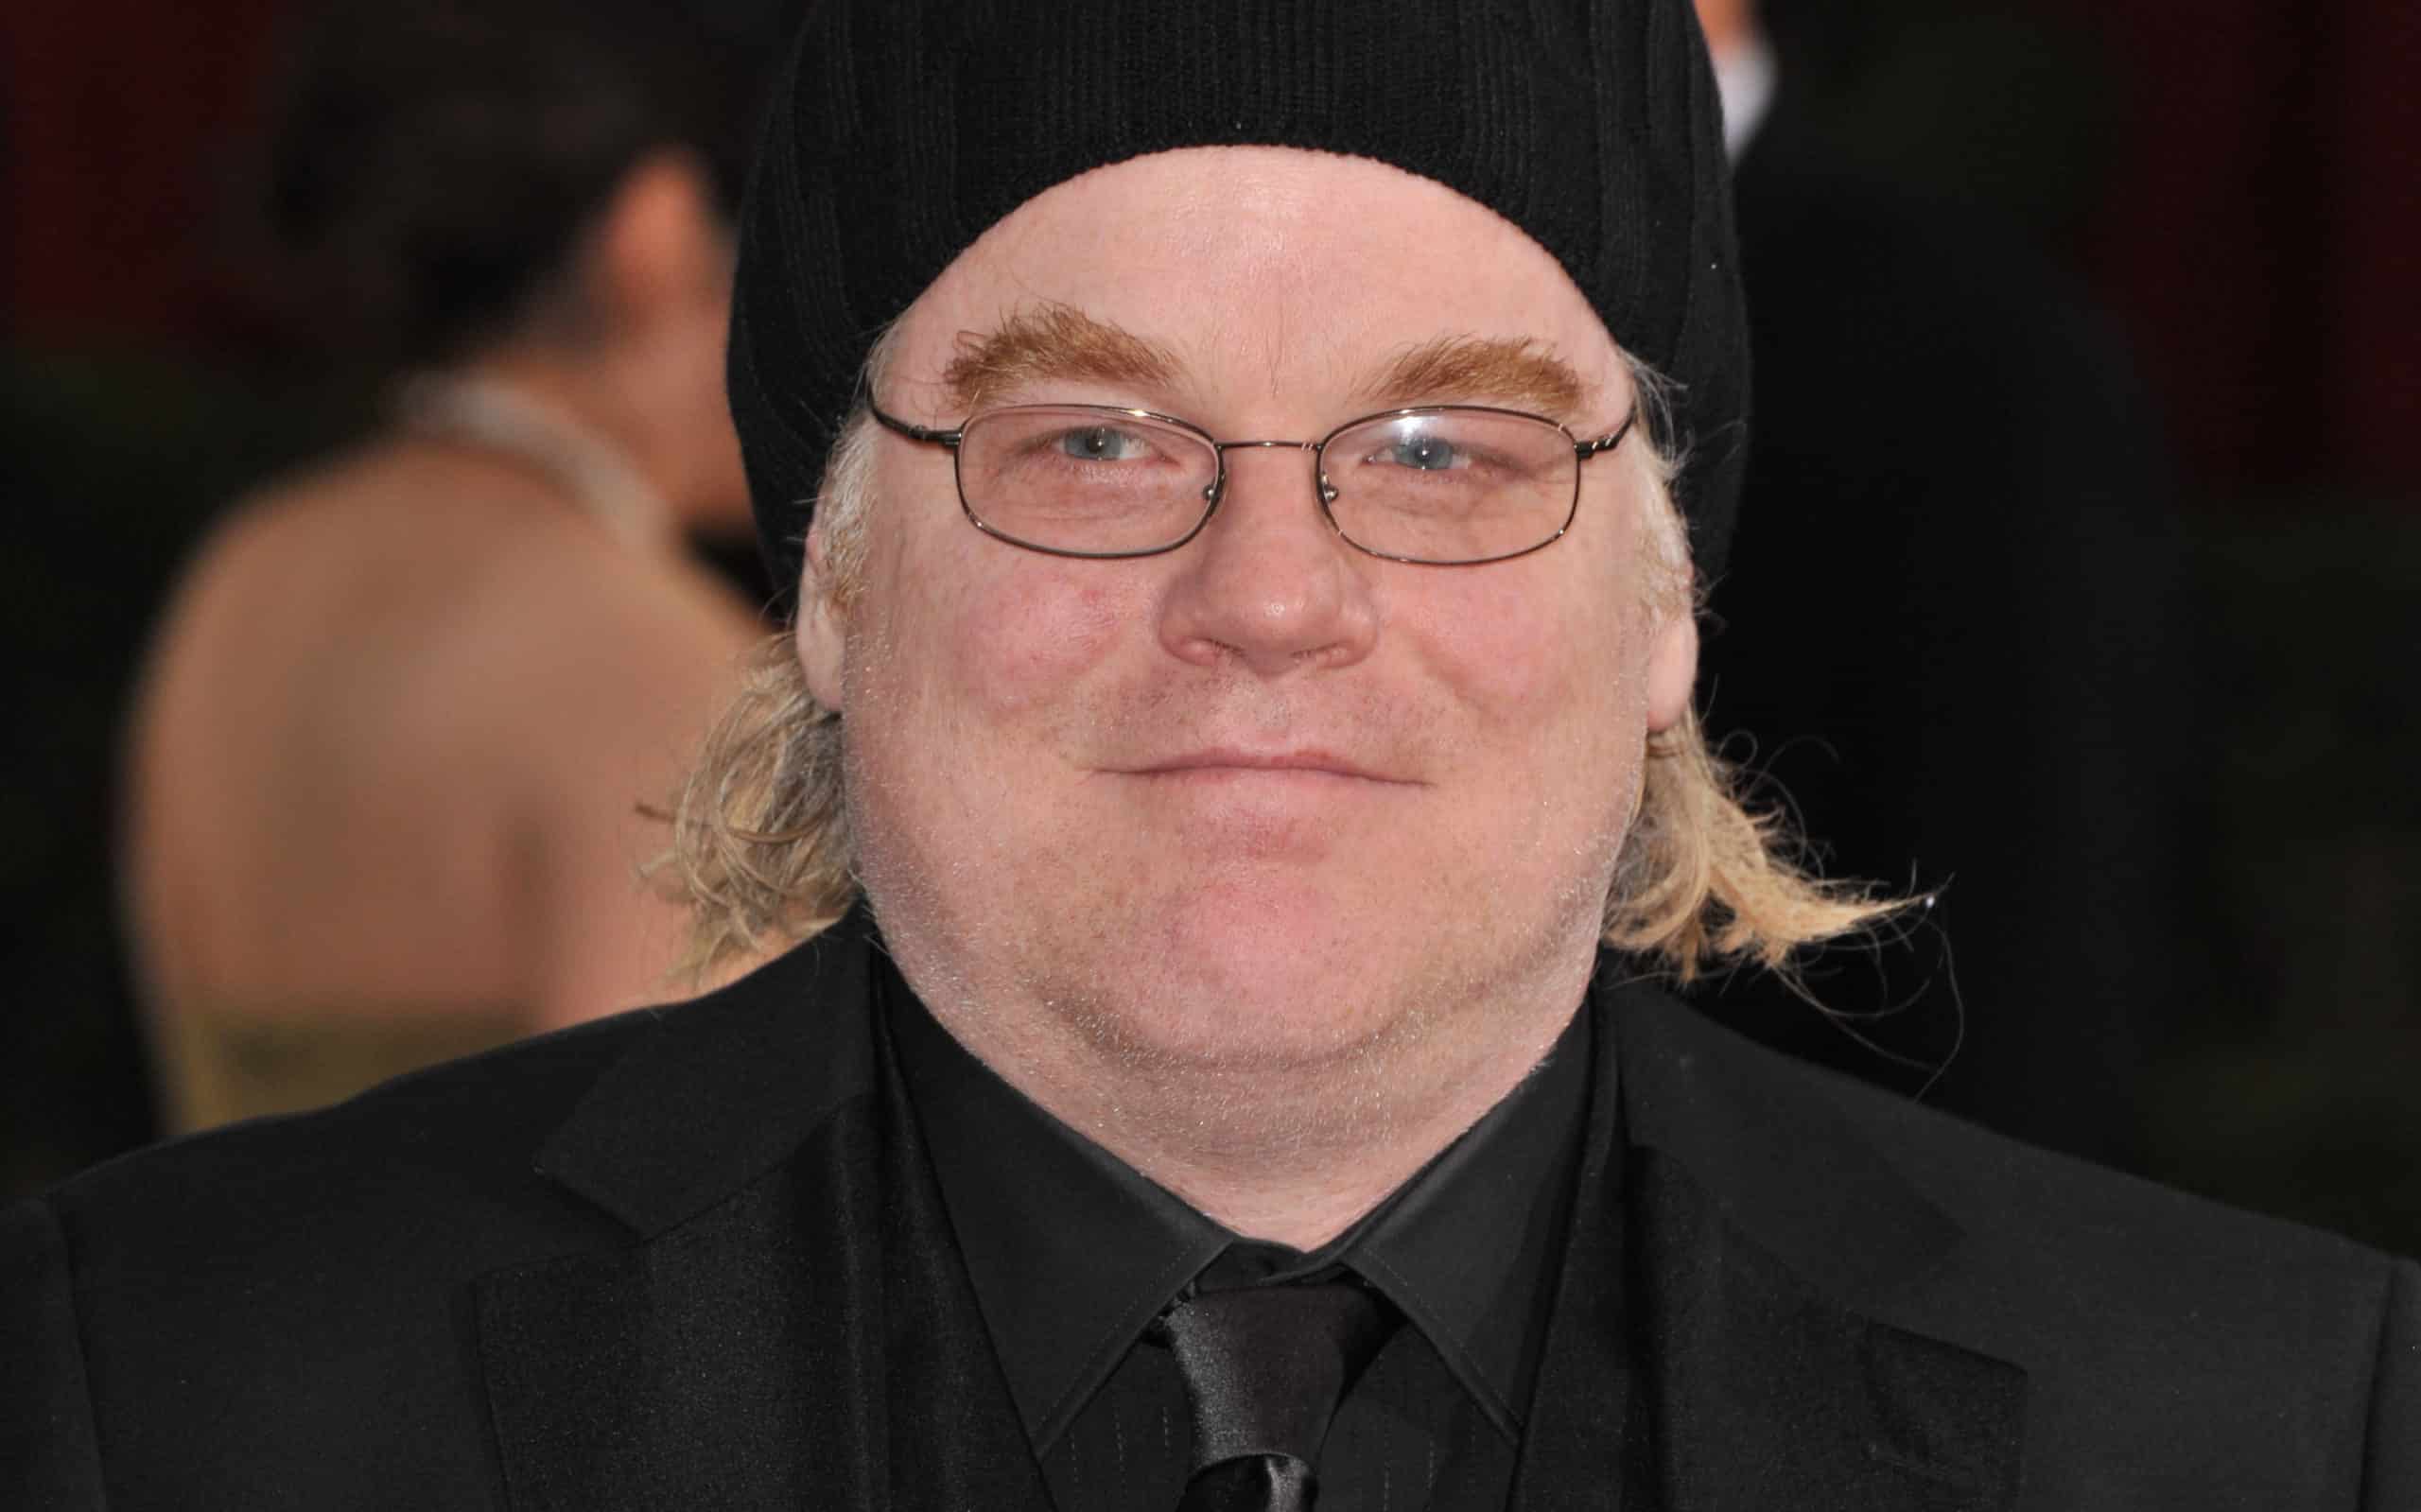 Philip Seymour Hoffman At The 81st Academy Awards At The